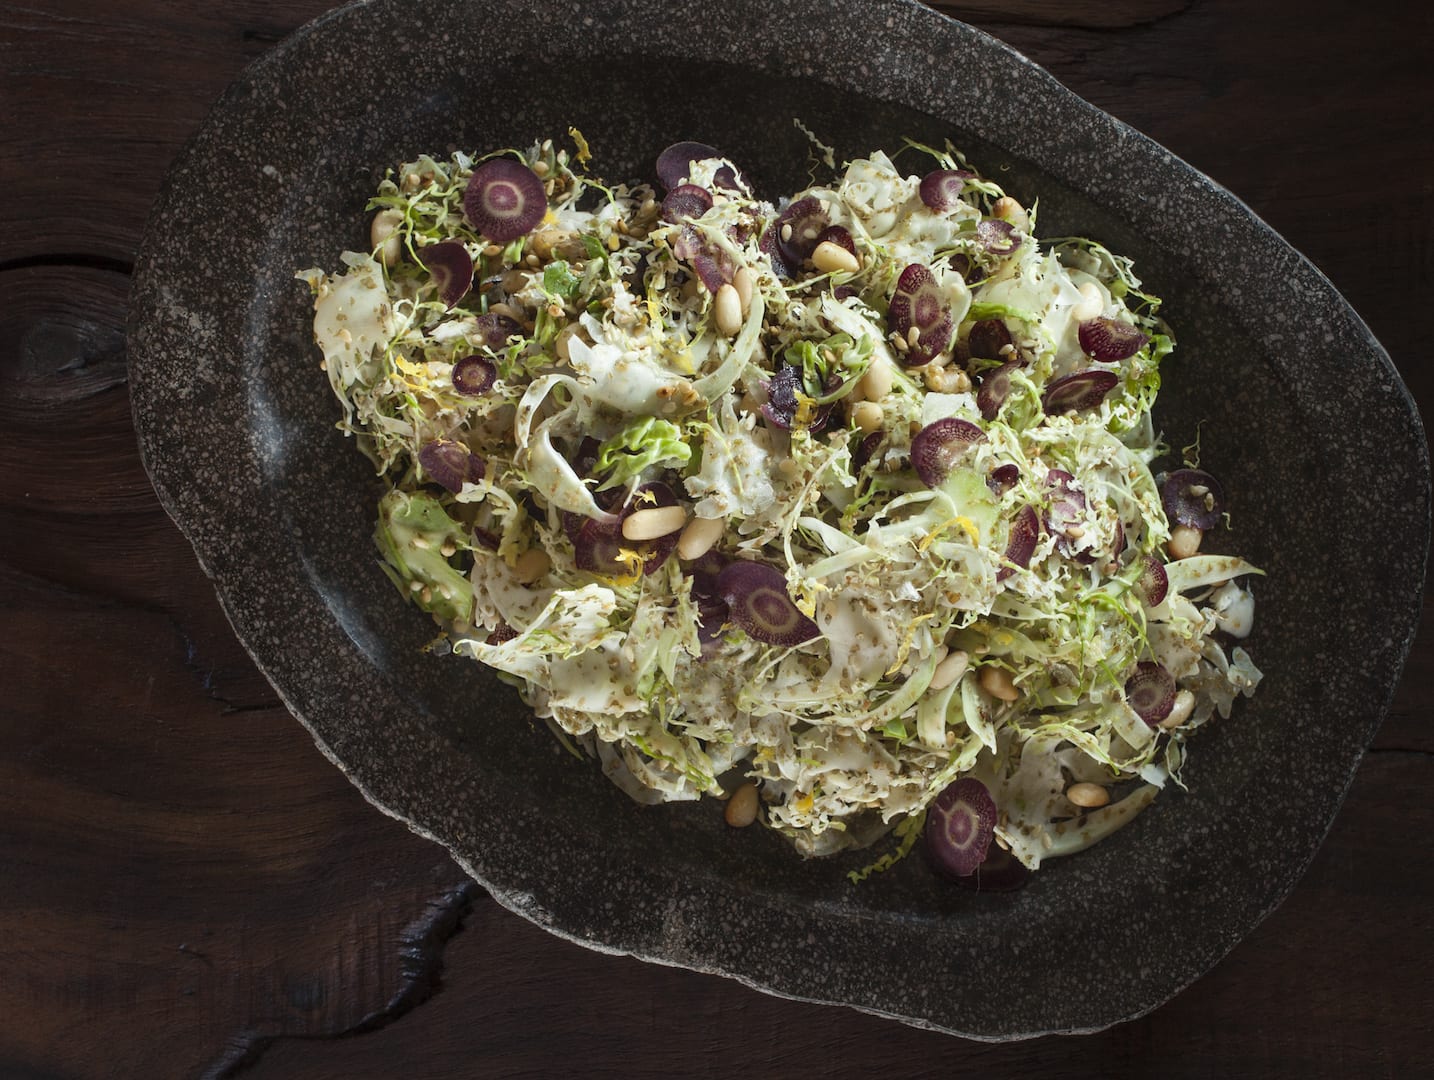 Shaved Brussels Sprouts with Za’atar Lemon and Pine Nuts at Crossroads by Chef Tal Ronnen, Executive Chef Scot Jones & Executive Pastry Chef Serafina Magnussen